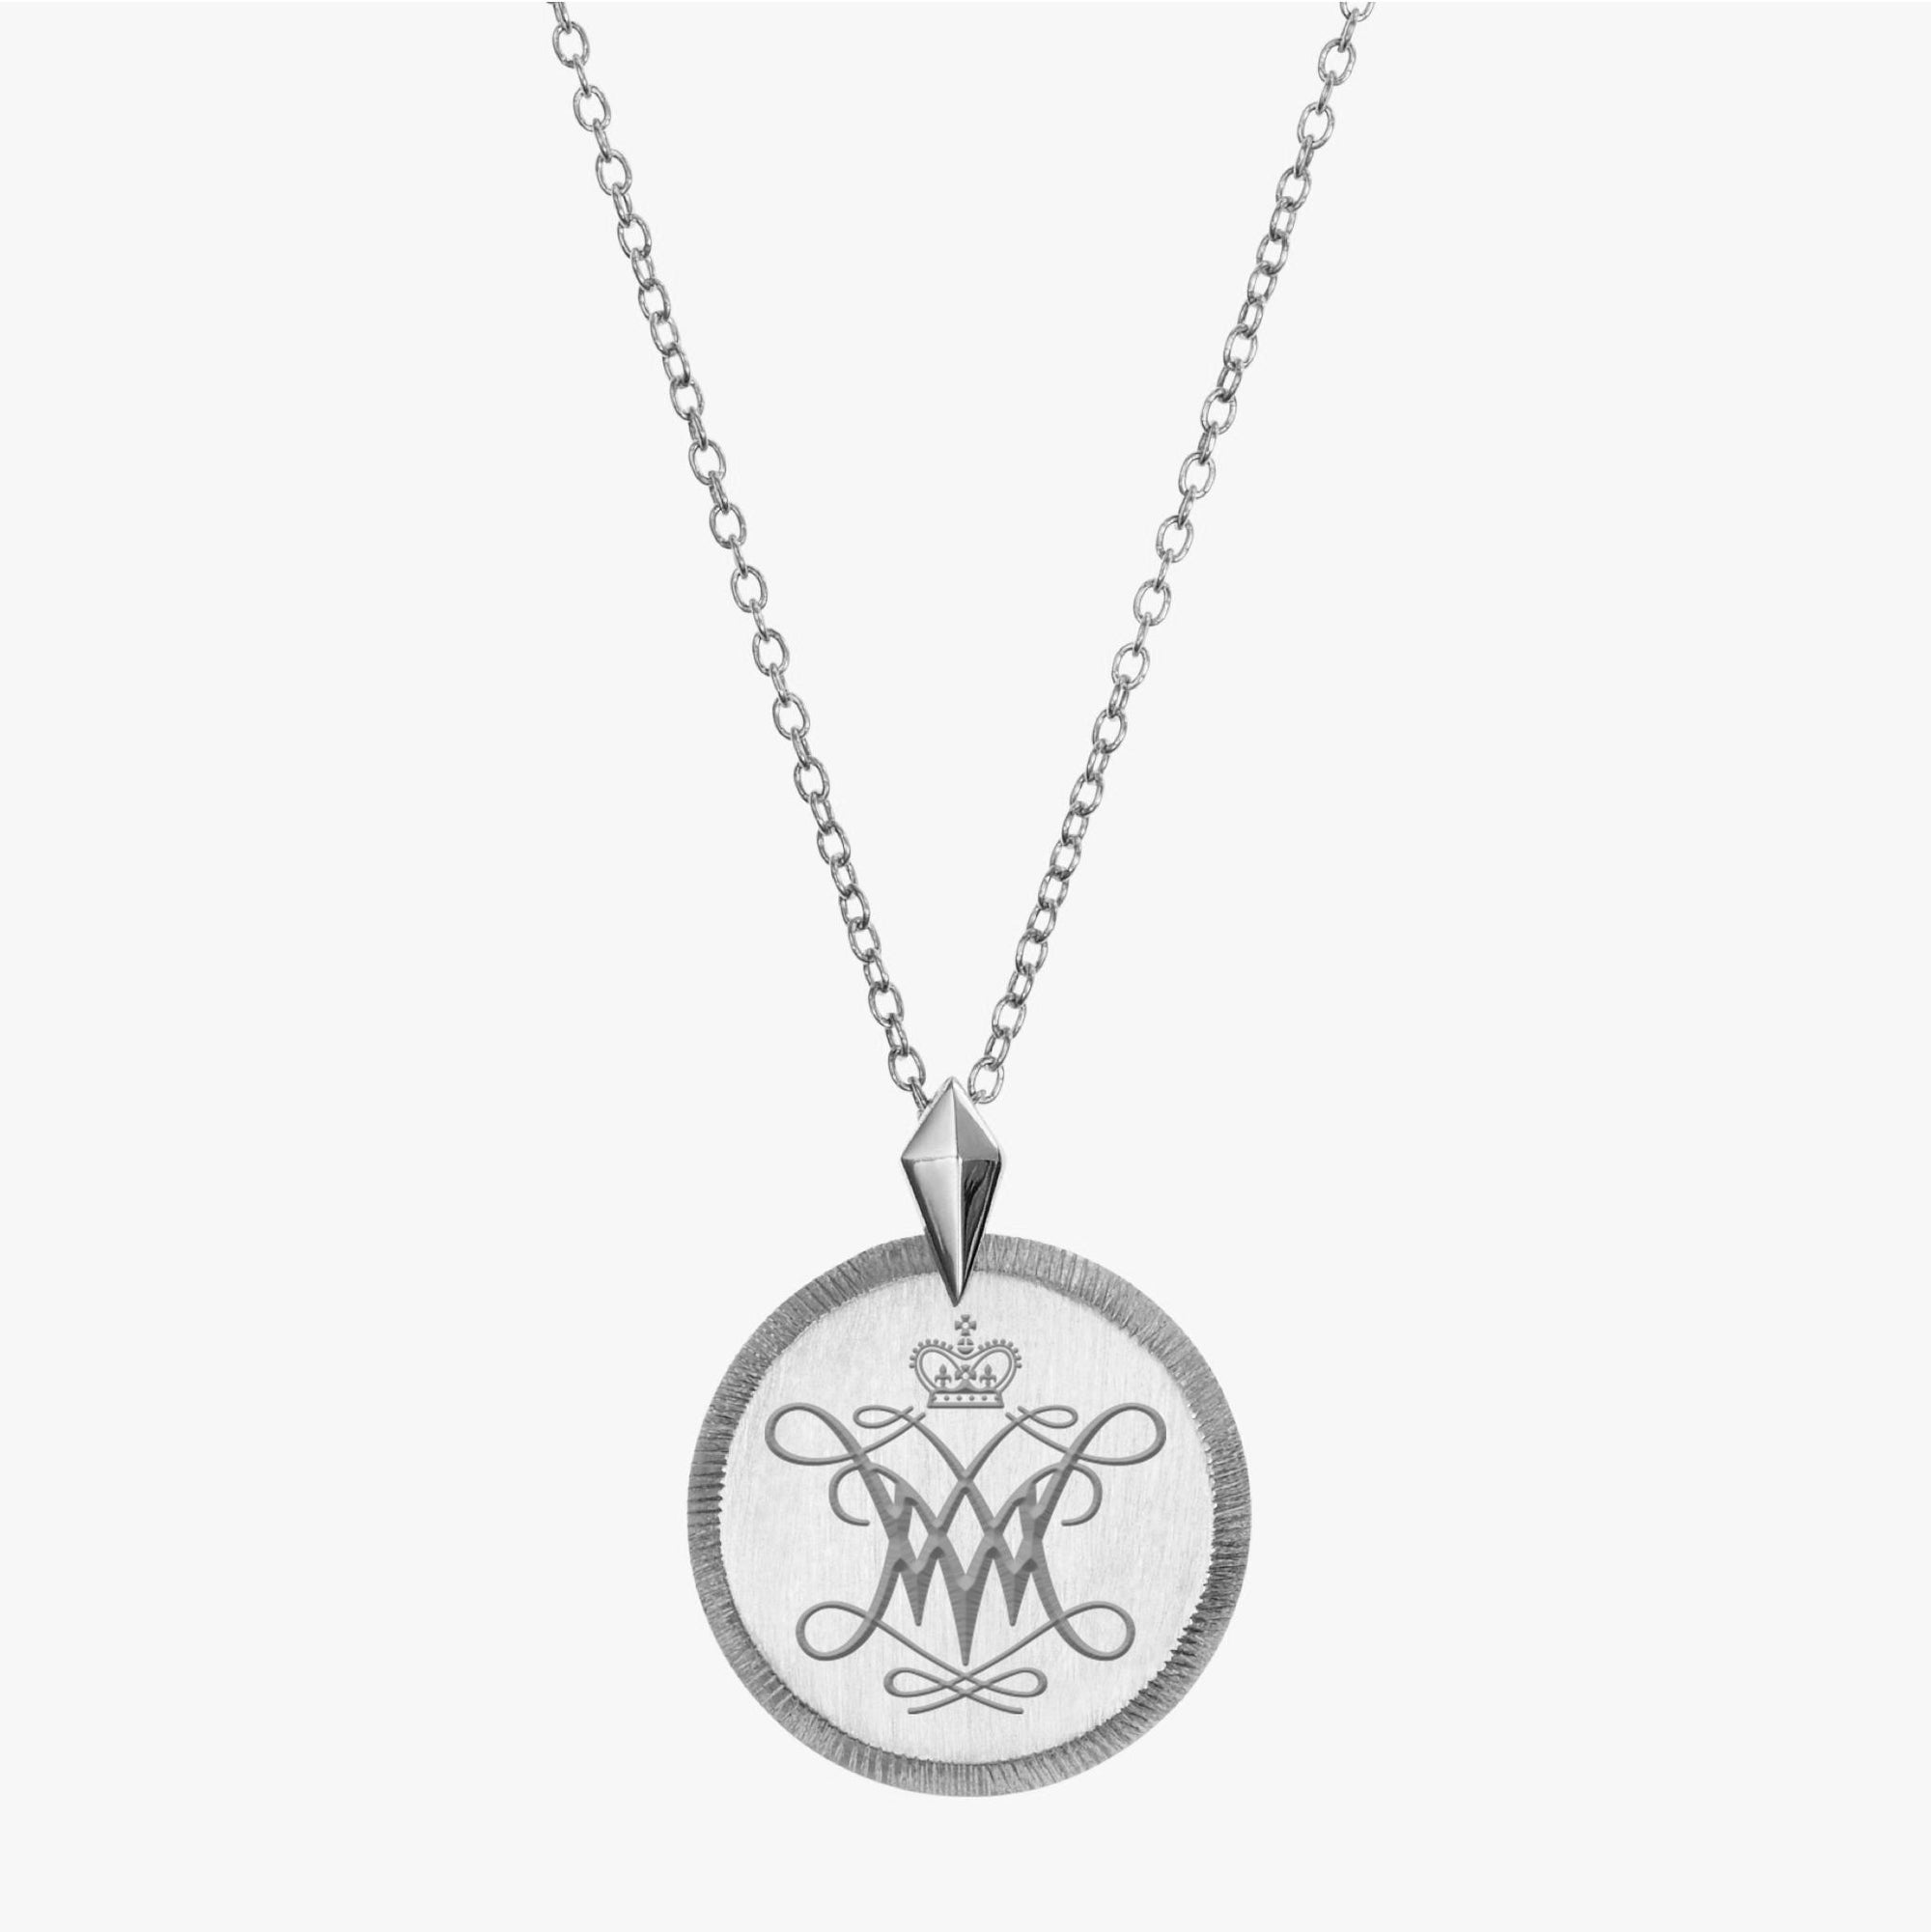 Silver William & Mary Florentine Cypher Necklace Petite